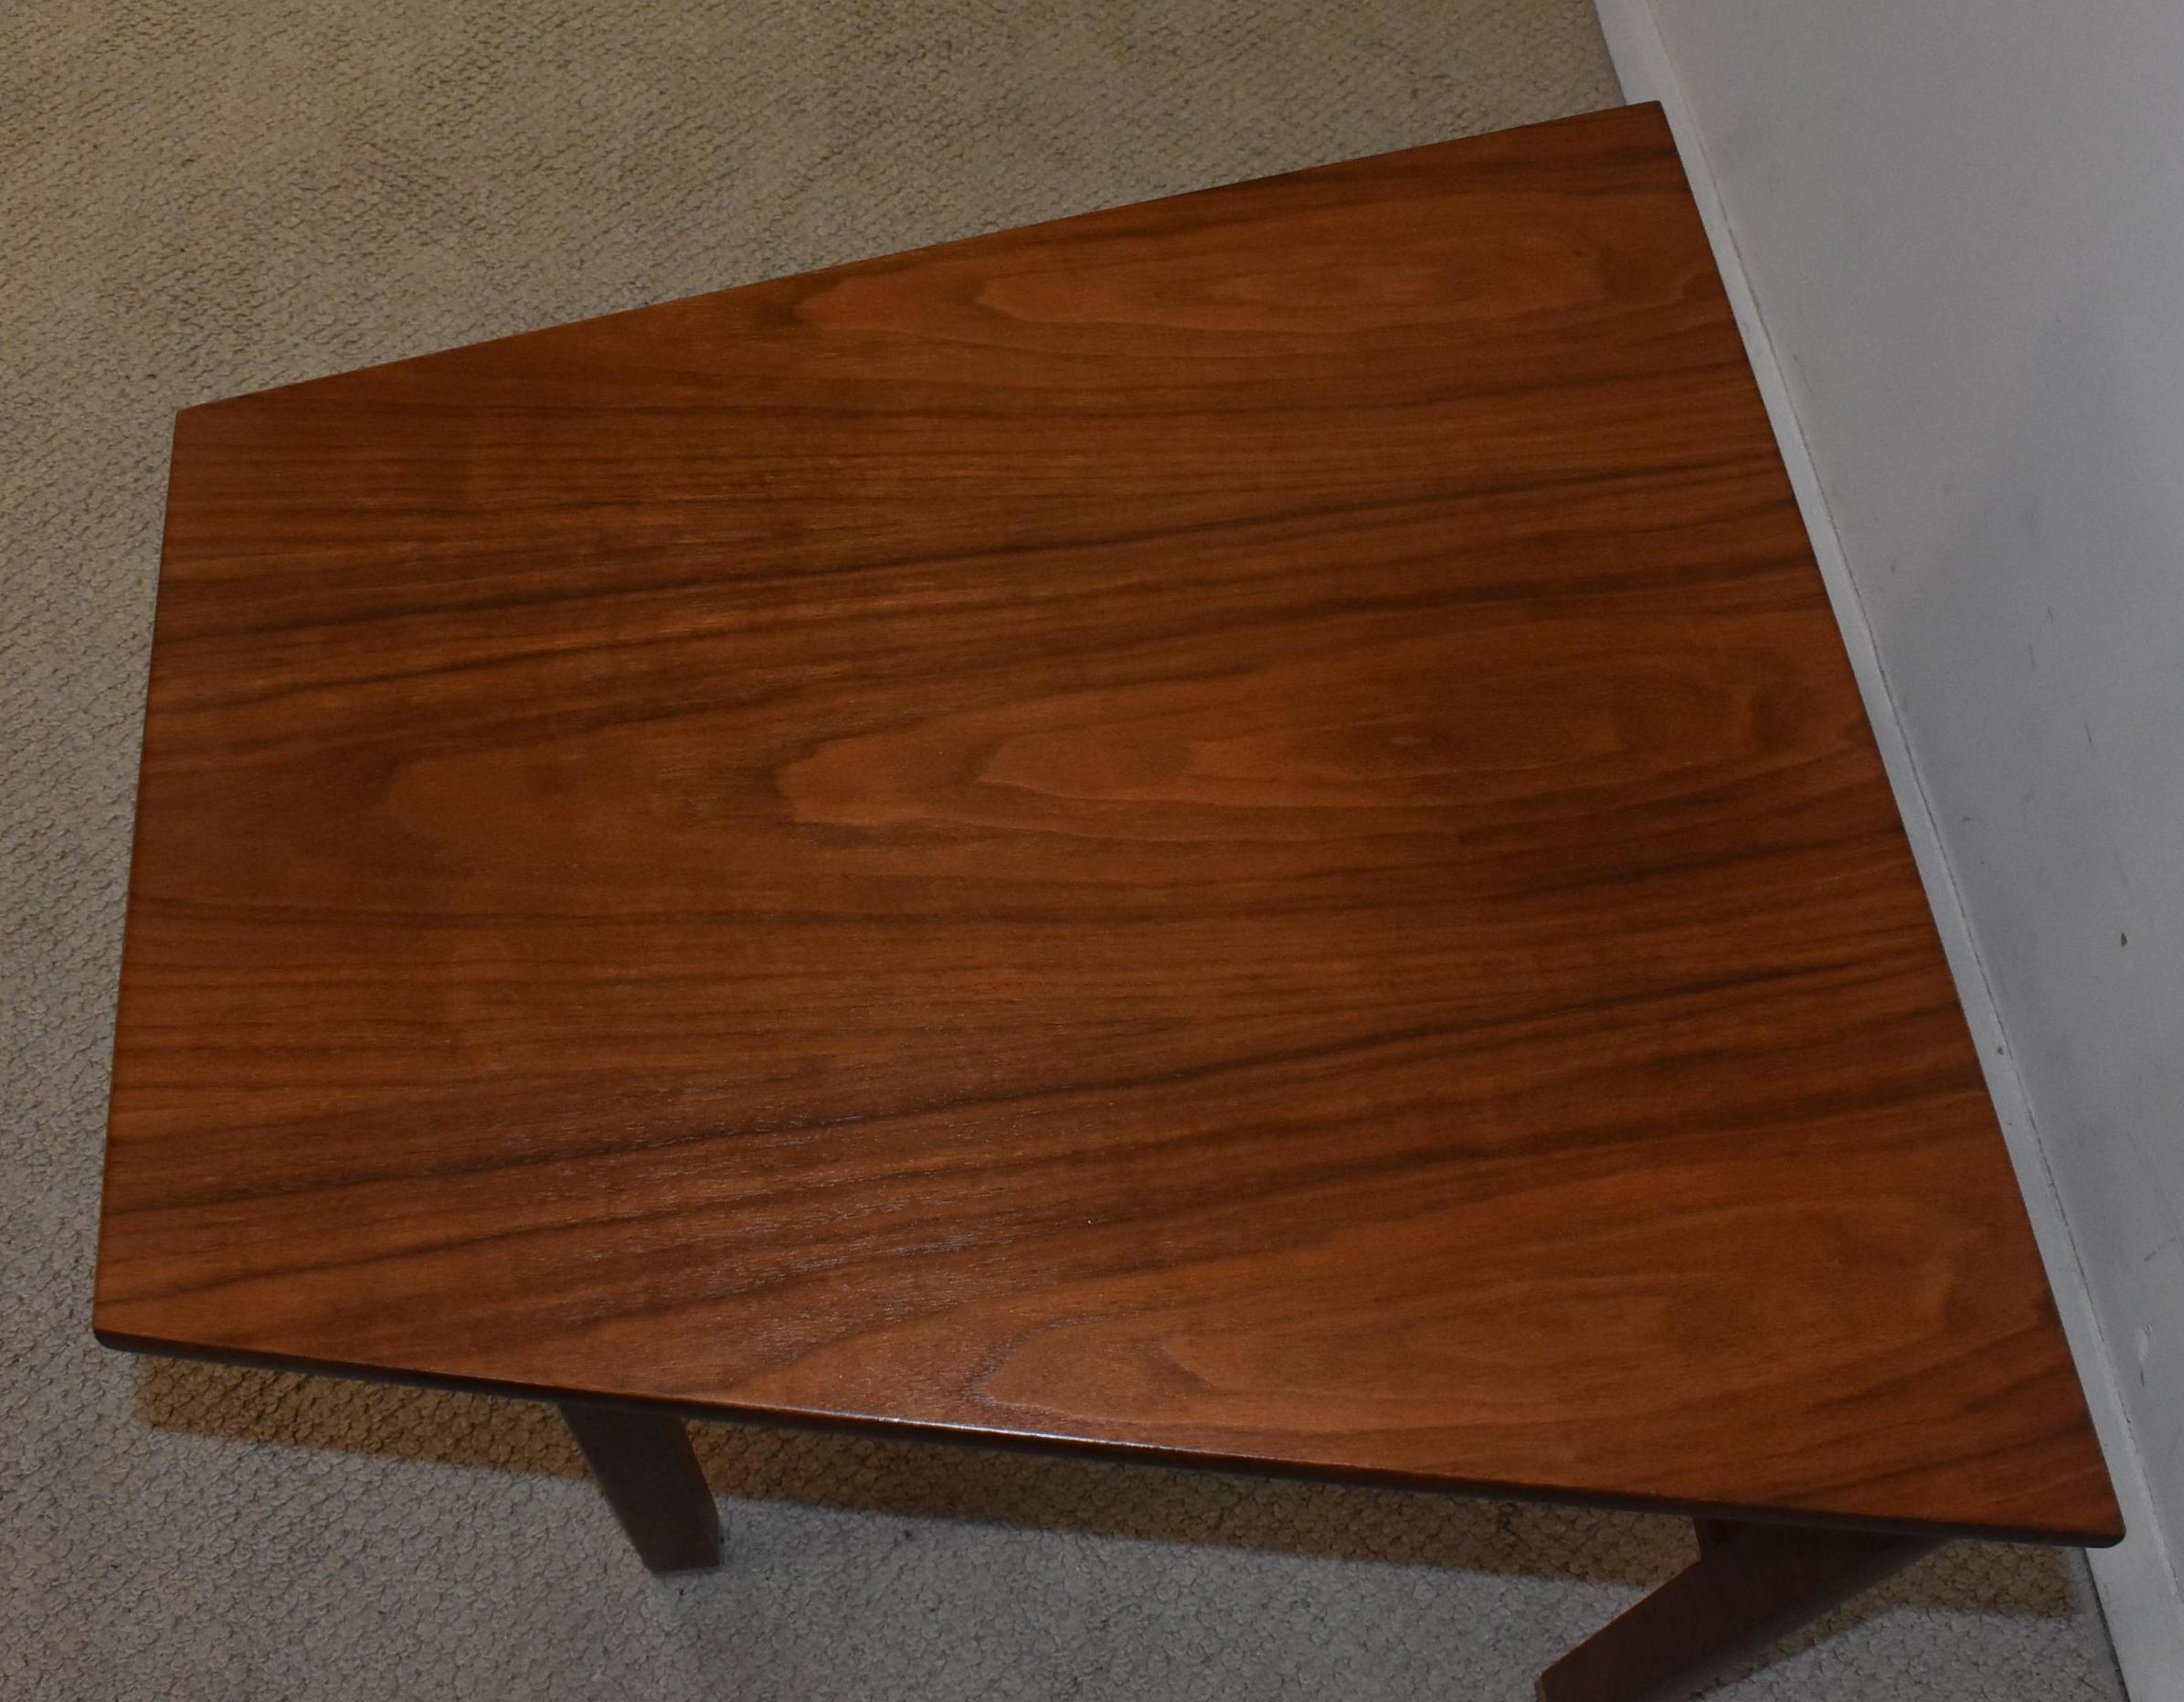 Mid-Century Modern Walnut Cantilever Top Wedge Table Designed by Edward Wormley for Dunbar